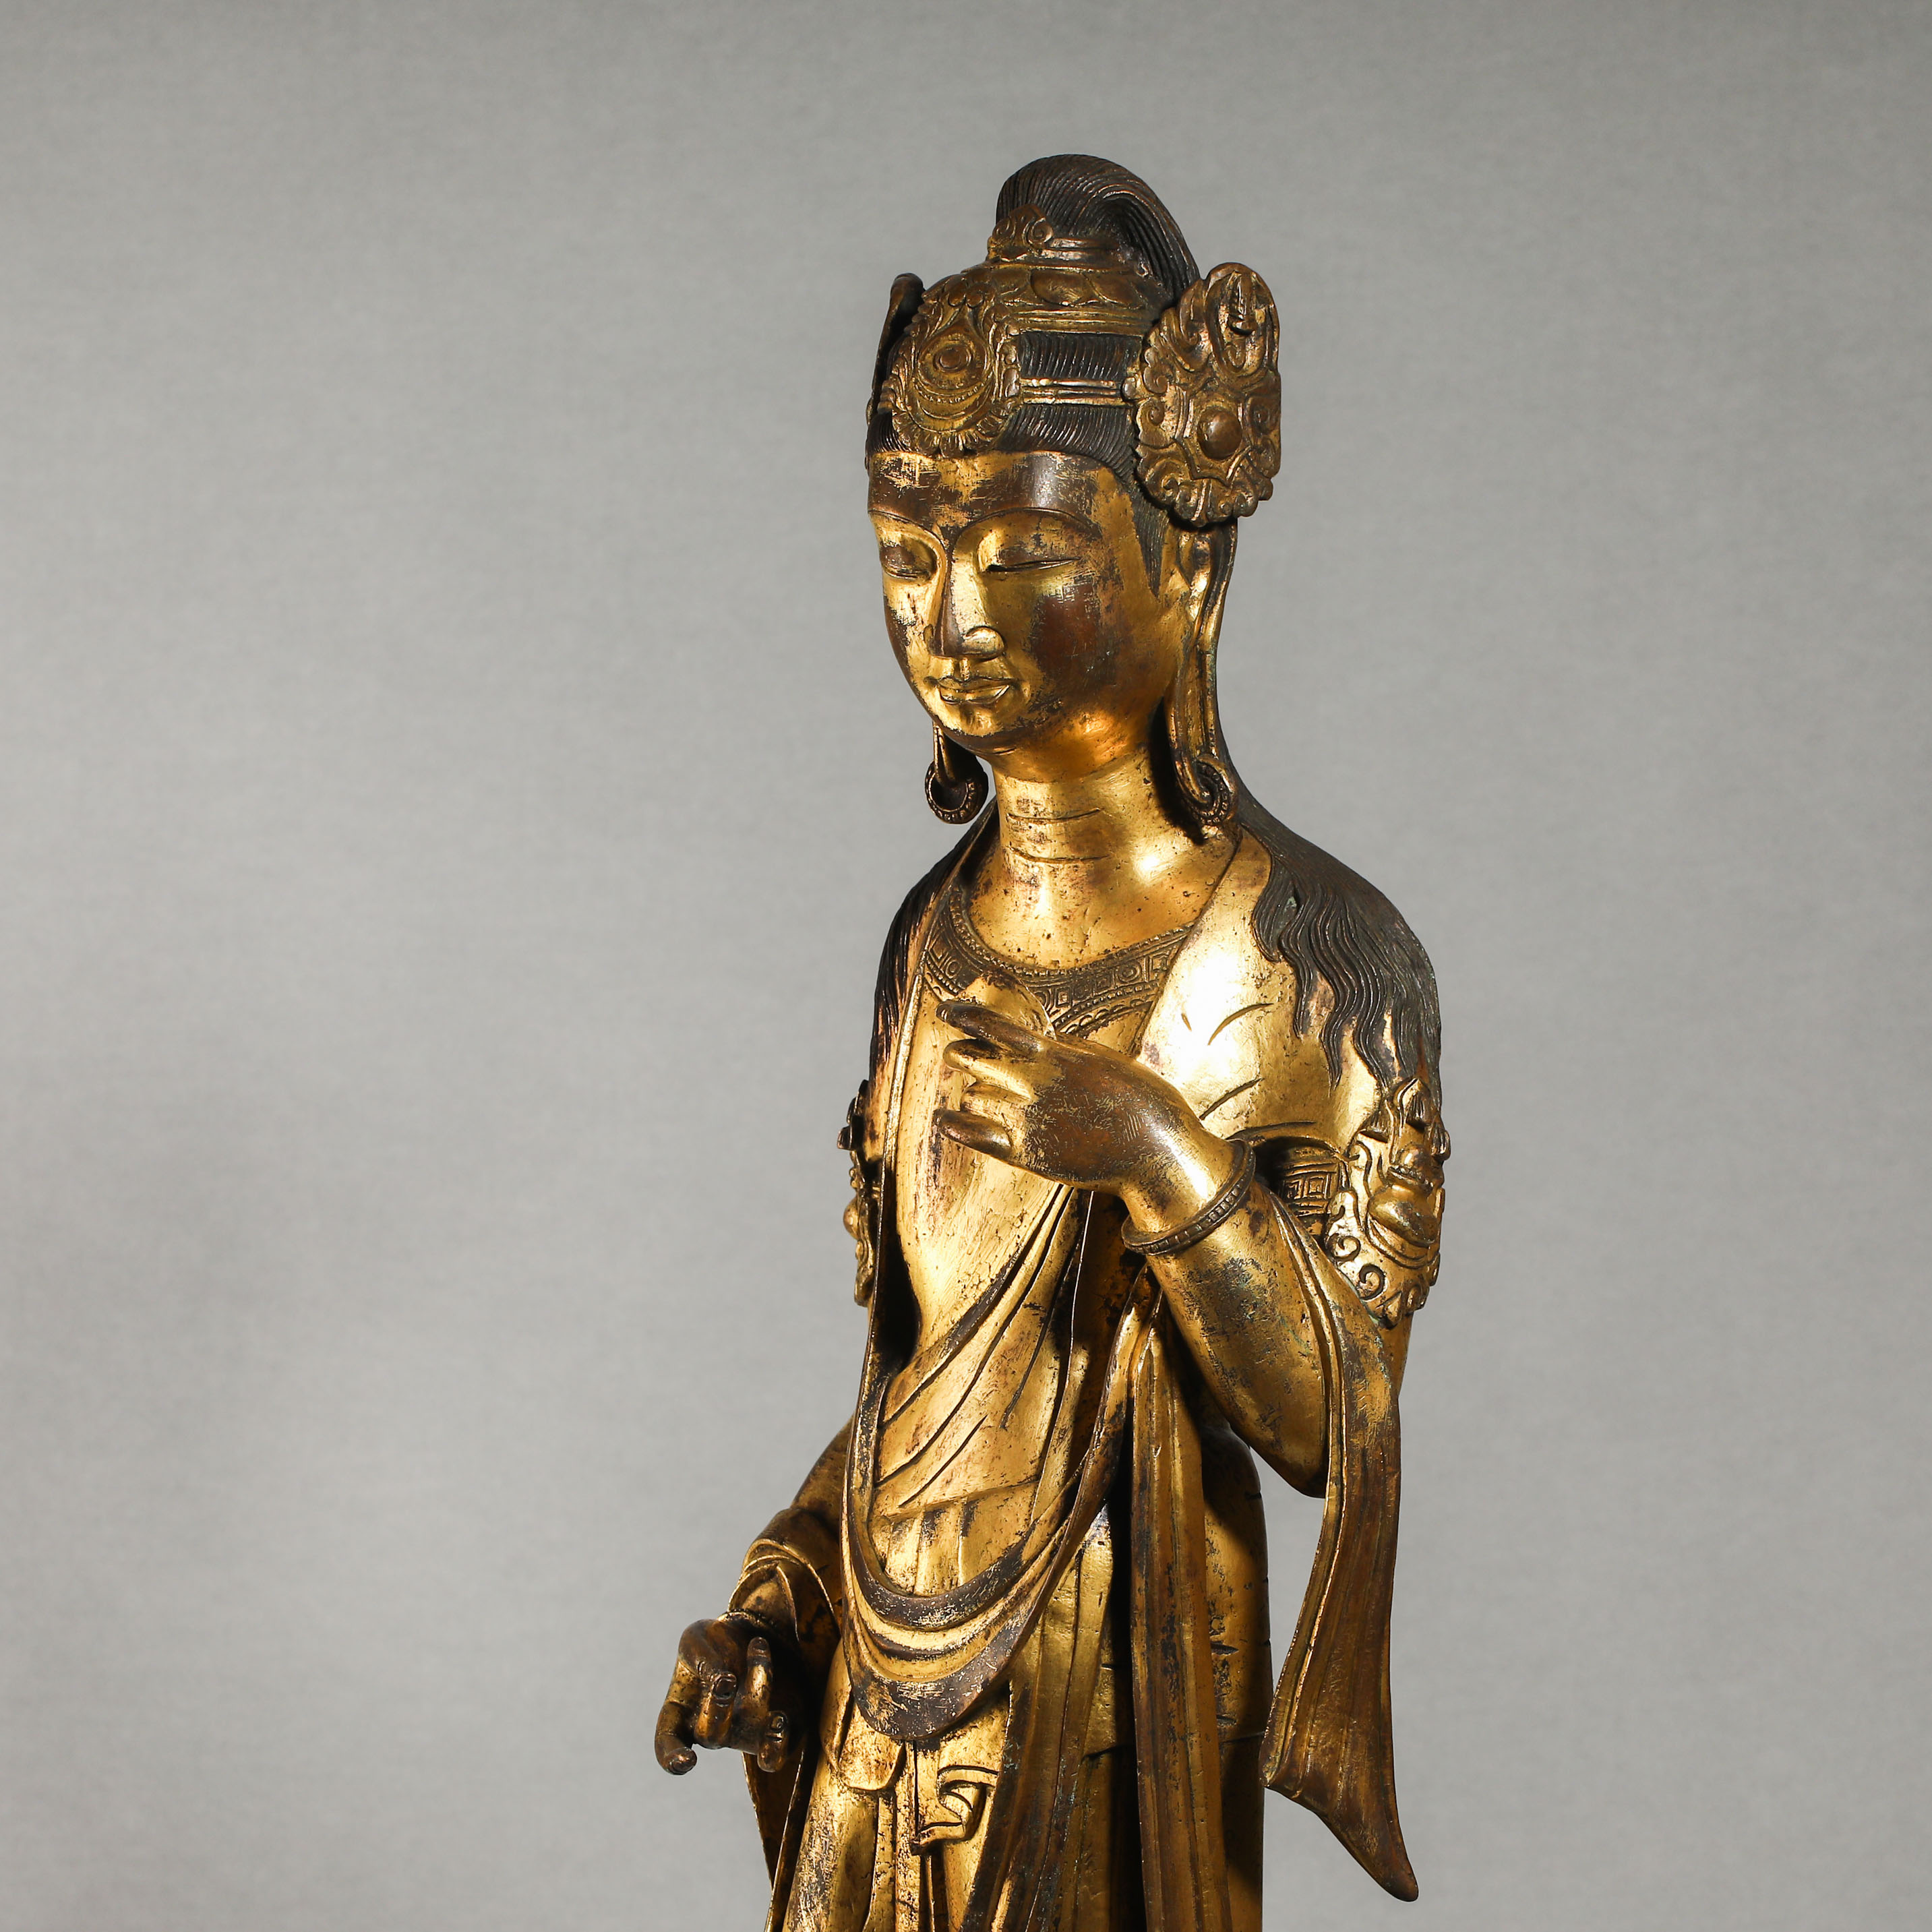 10th century gilded statue of Guanyin Buddha - Image 9 of 14